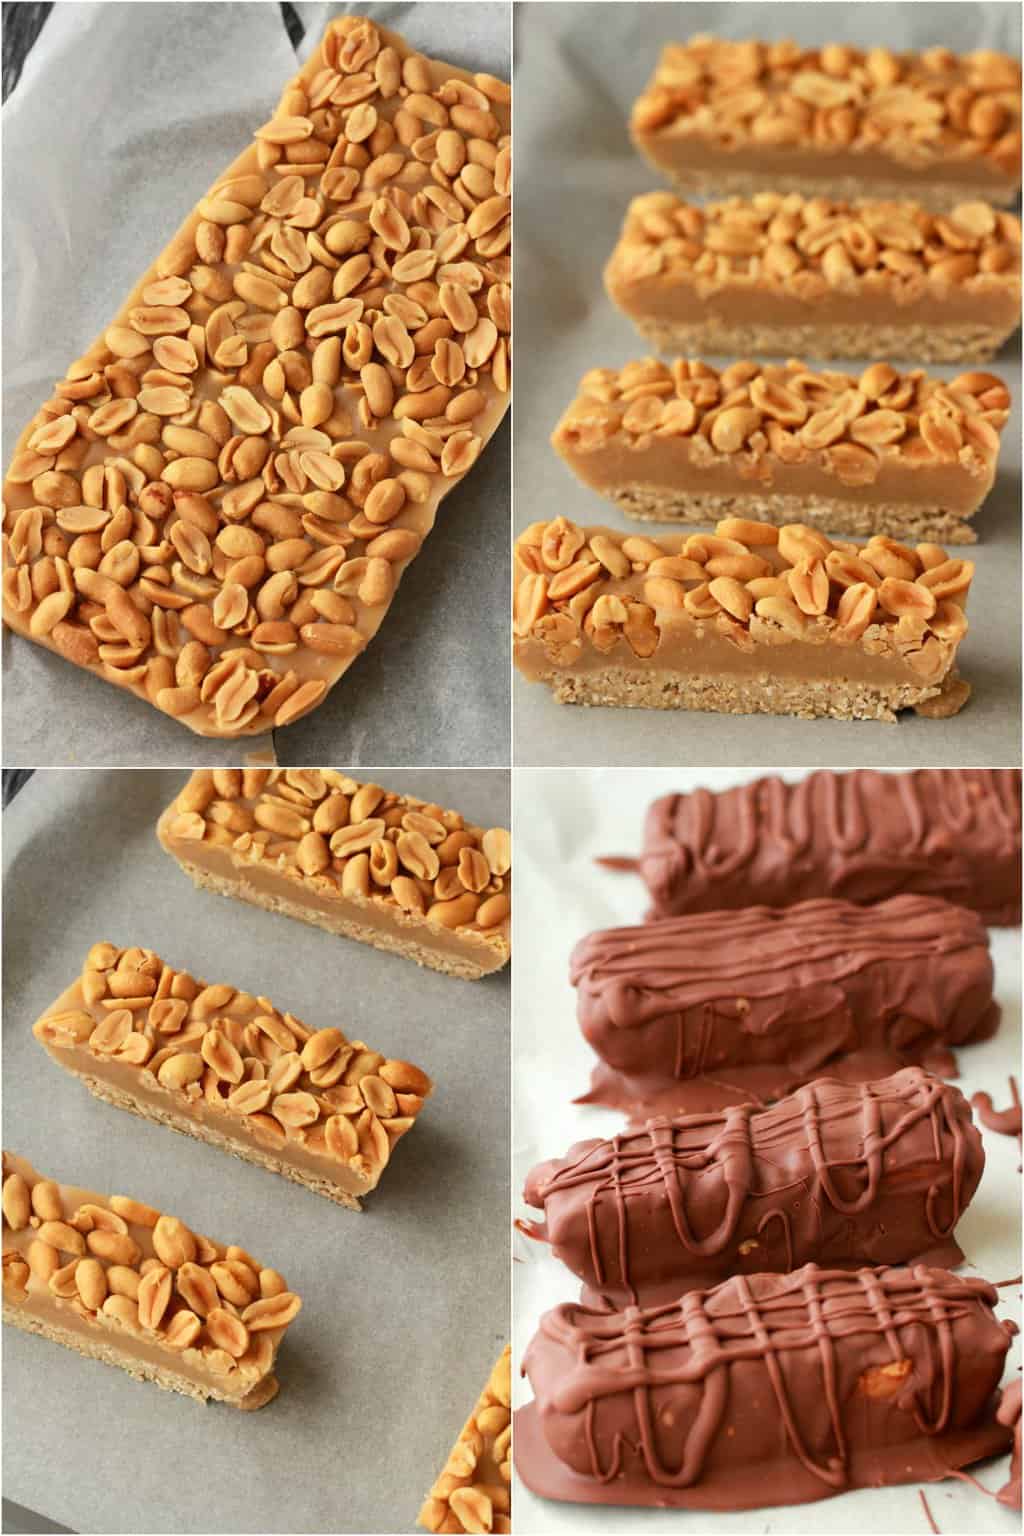 Process photos of making vegan snickers. 